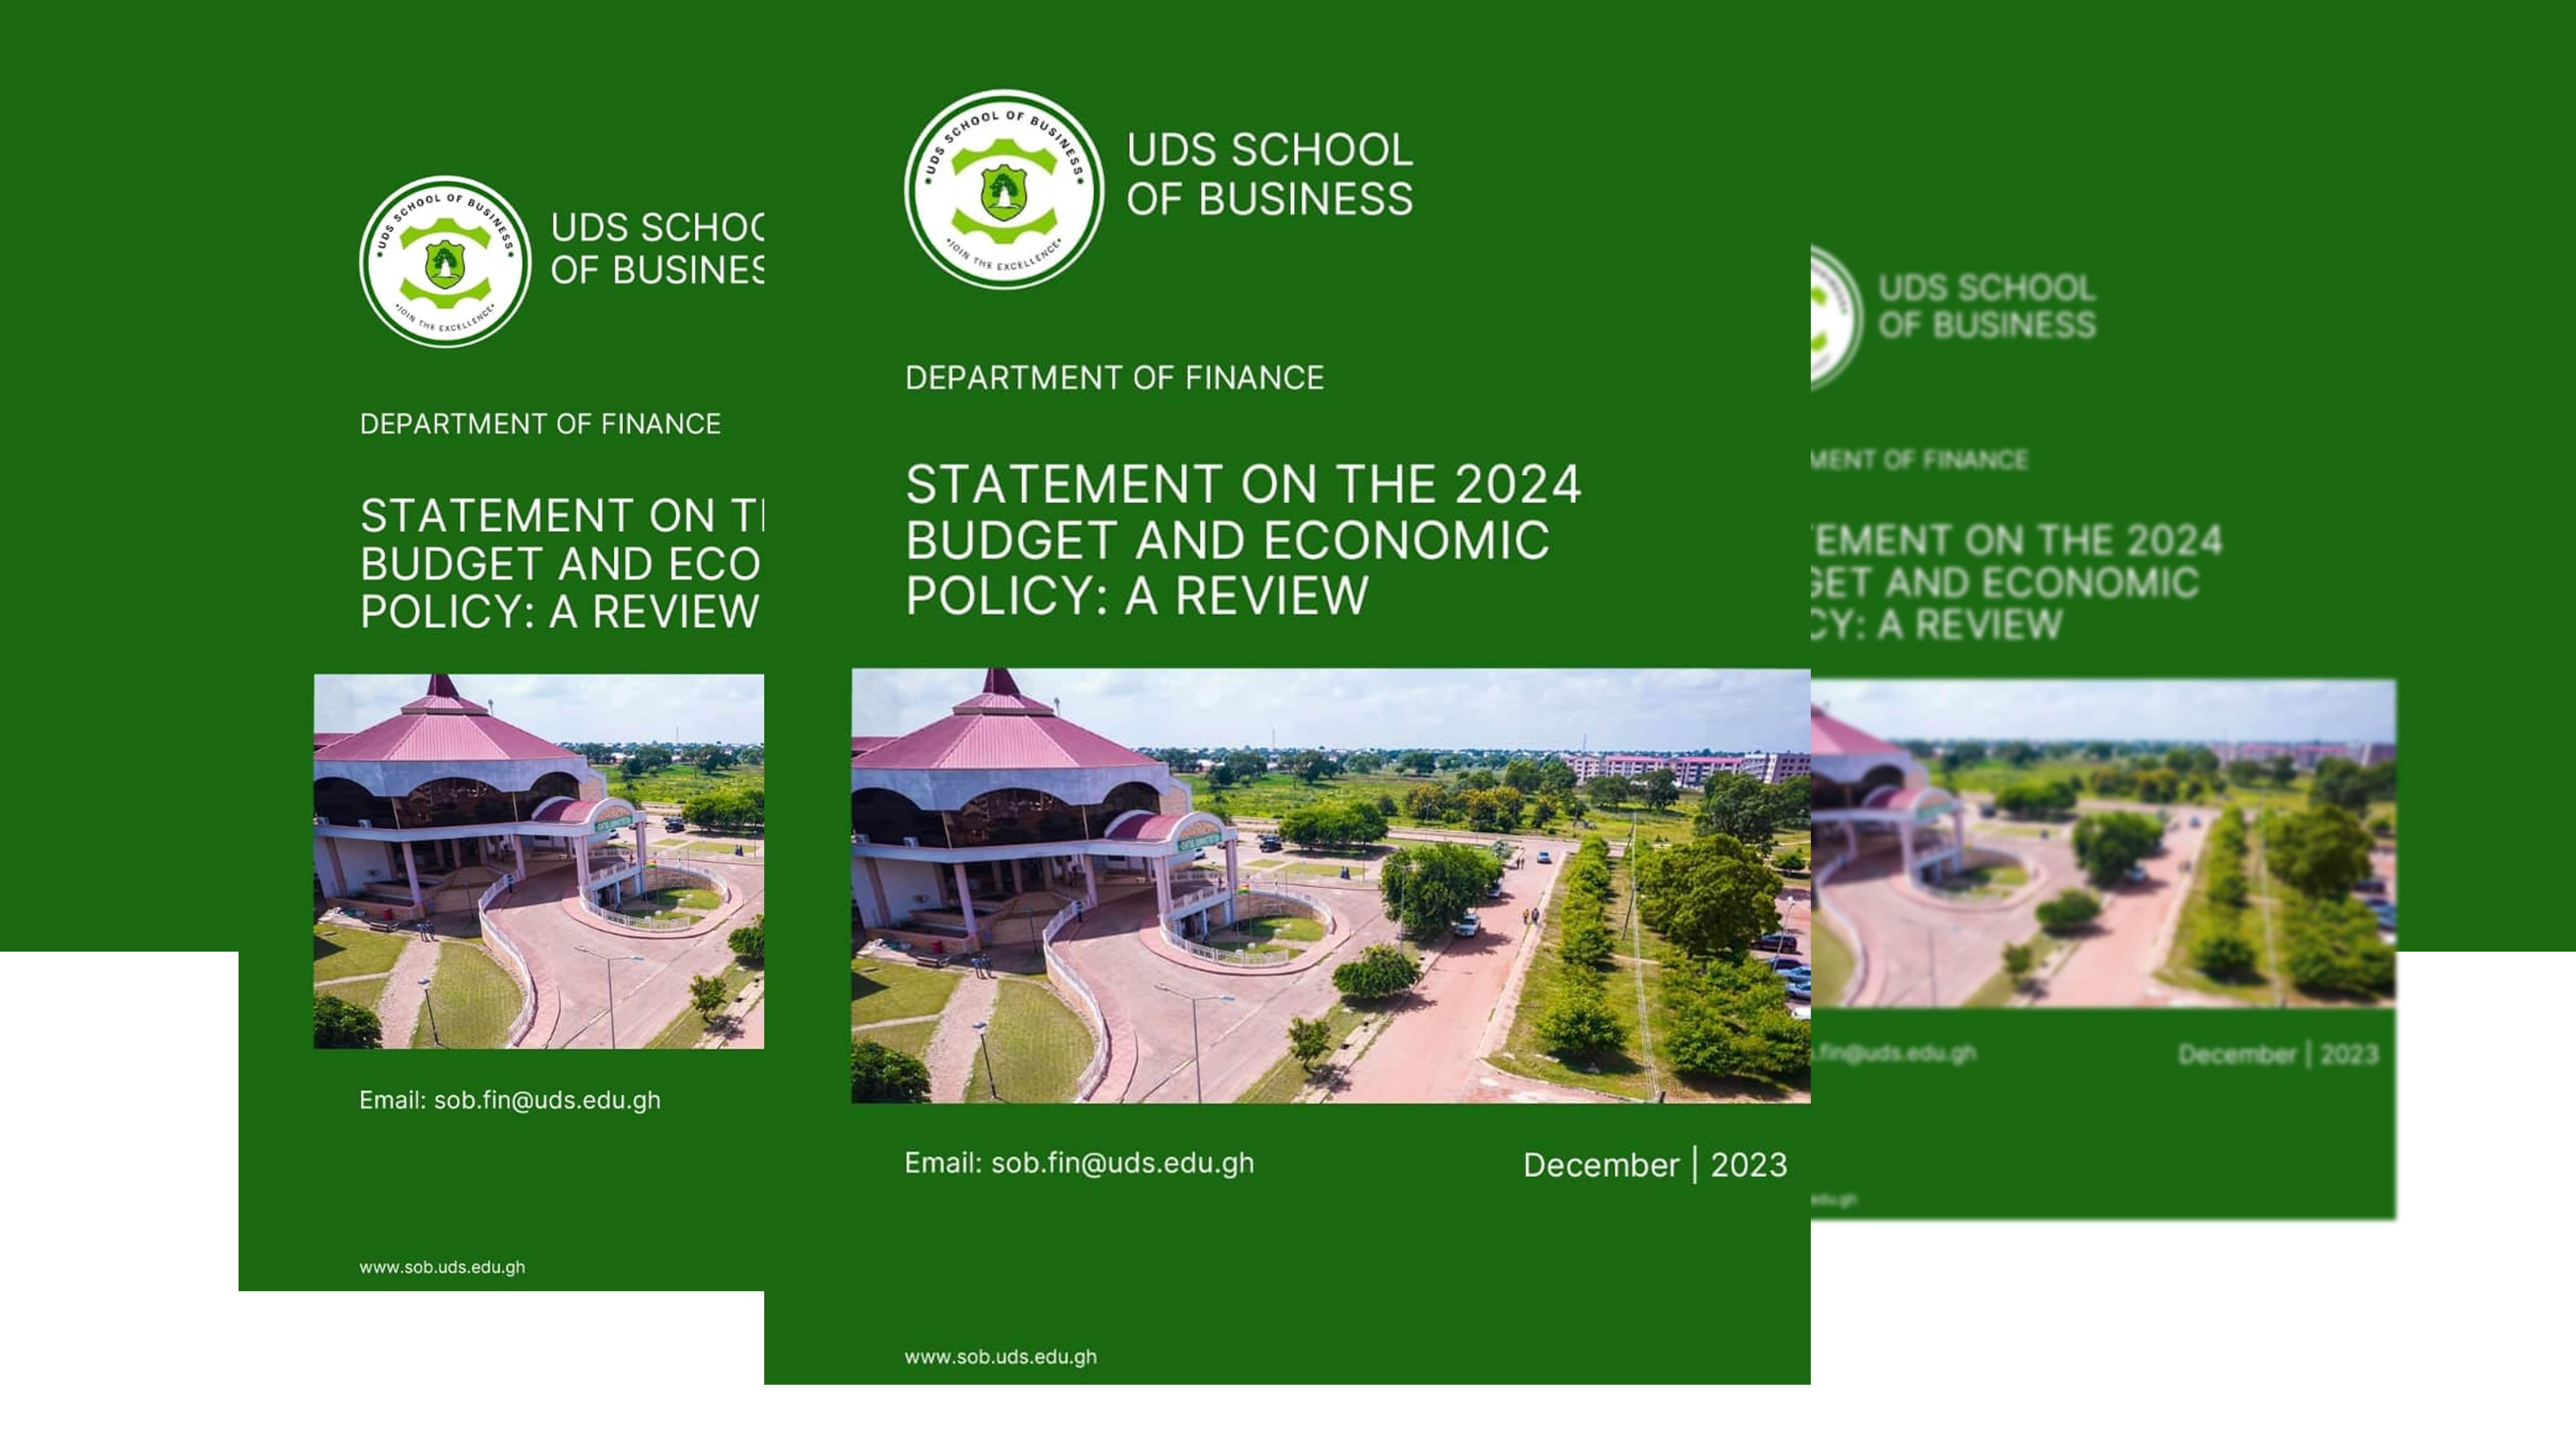 UDS School Of Business Releases Statement Reviewing The 2024 Budget And Economic Policy